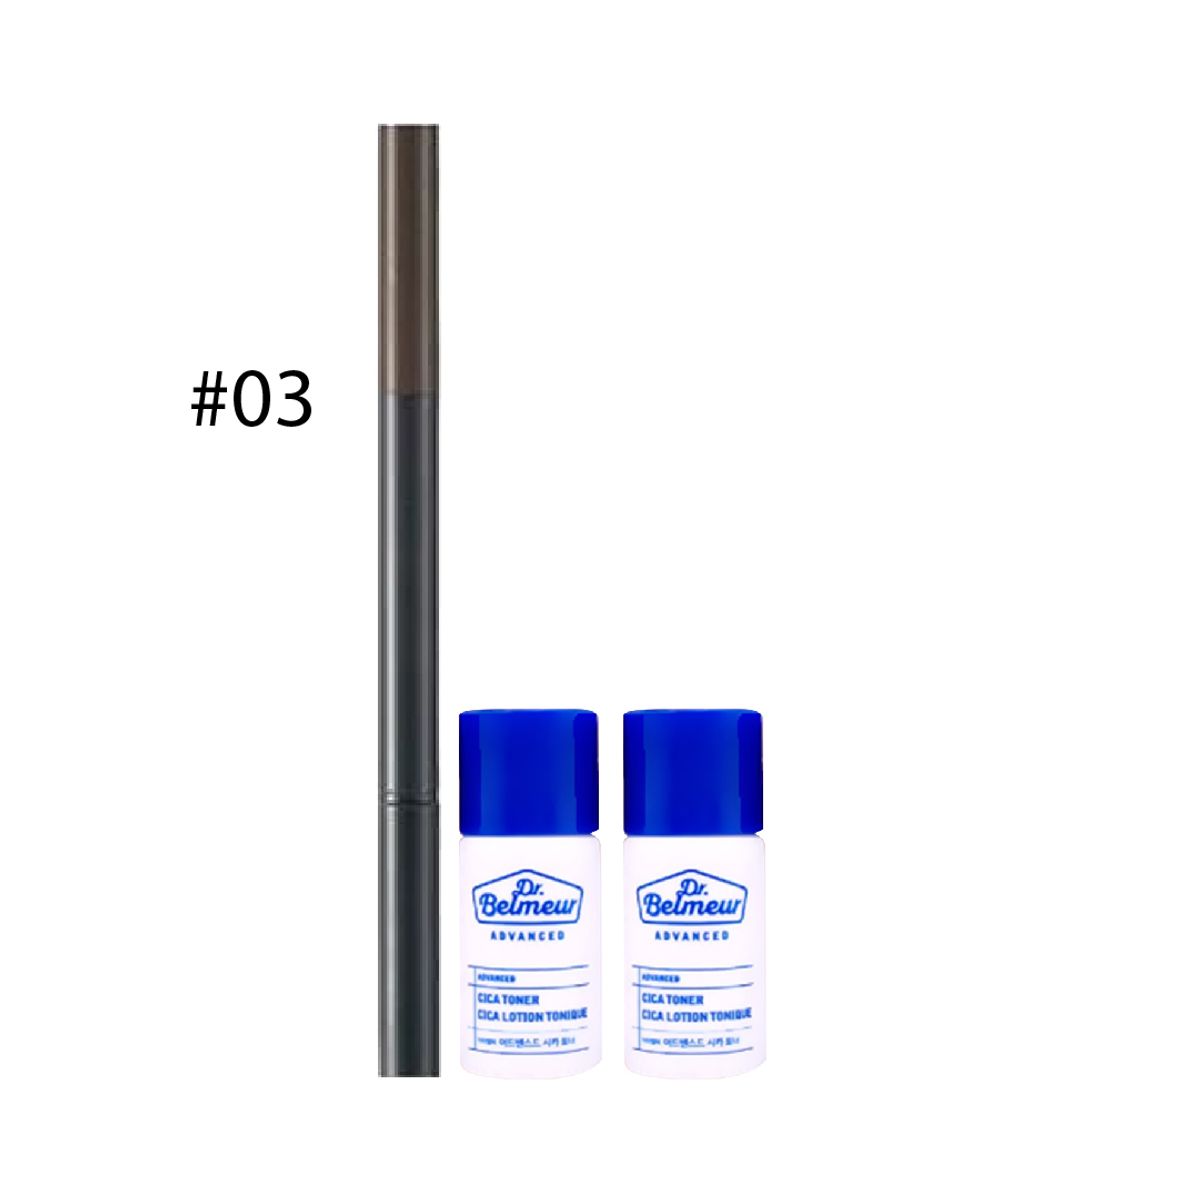 gift-combo-chi-chan-may-designing-eyebrow-03-brown-2-sample-sua-duong-dr-belmeur-advanced-cica-emulsion-6ml-1